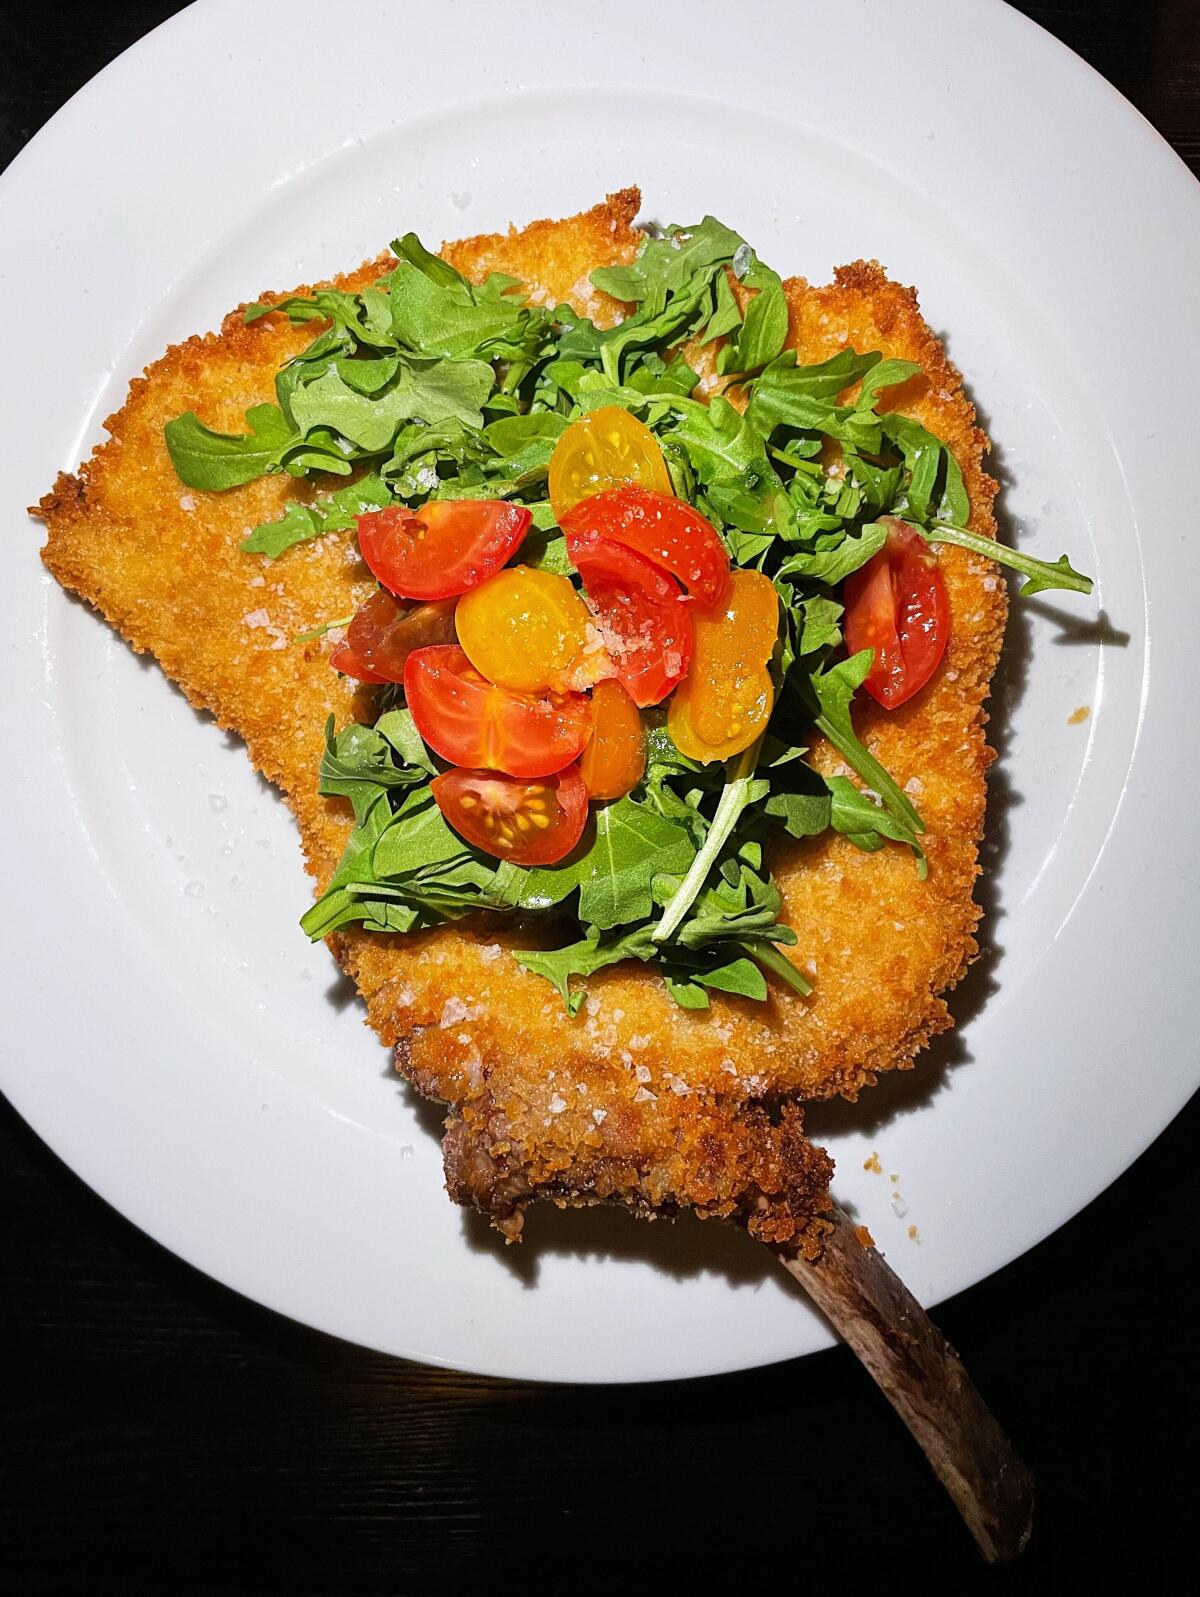 Cotoletta alla Milanese, a breaded veal chop with arugula and tomatoes, at Dal Milanese.